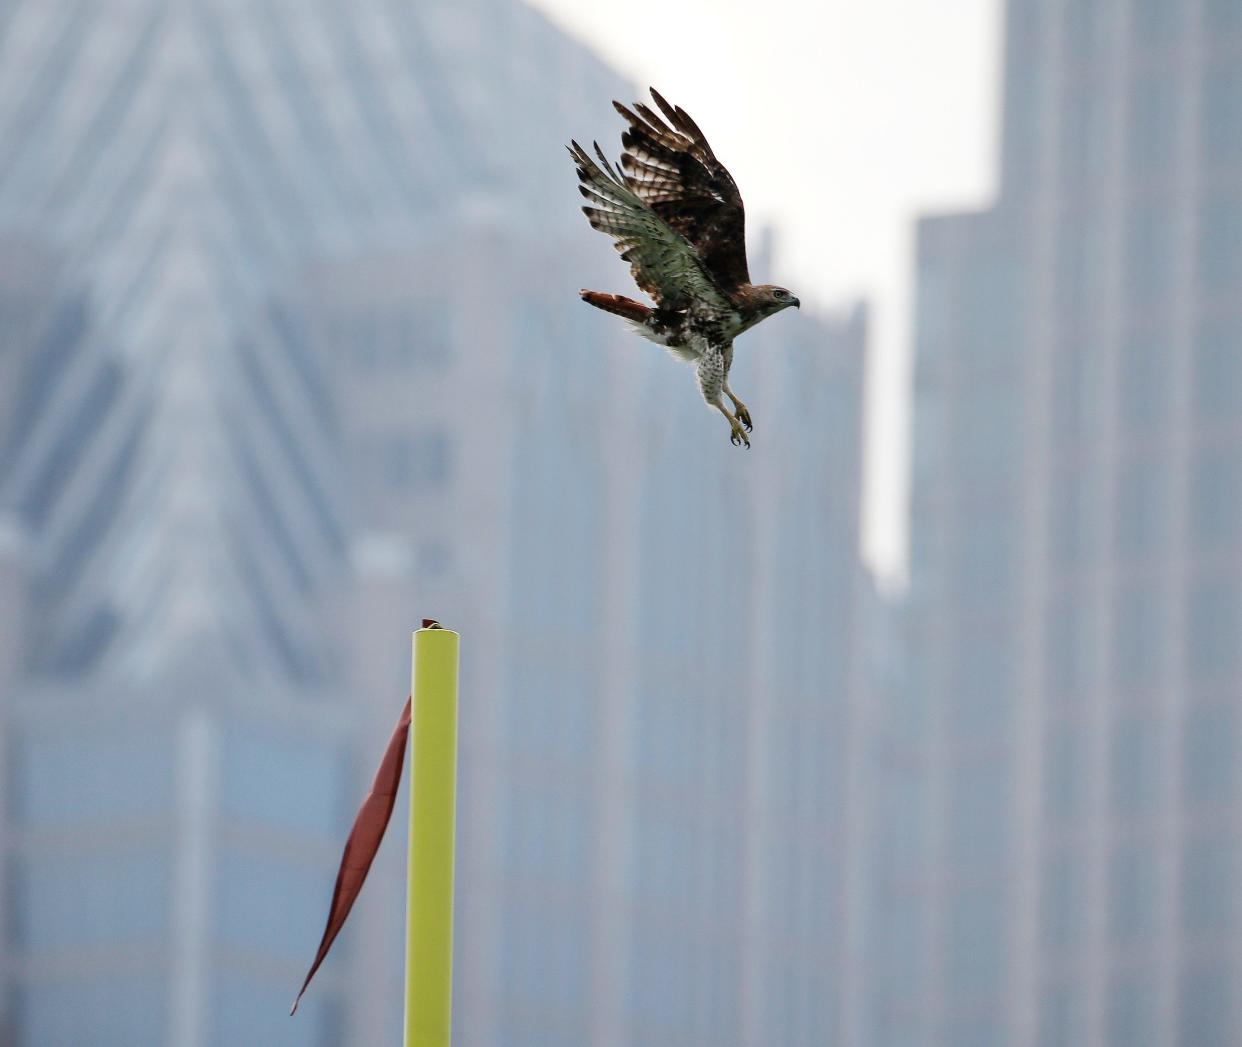 A peregrine falcon takes off from a goal post at the Carolina Panthers' NFL football practice fields in Charlotte, N.C., Wednesday, June 15, 2016. (AP Photo/Chuck Burton)